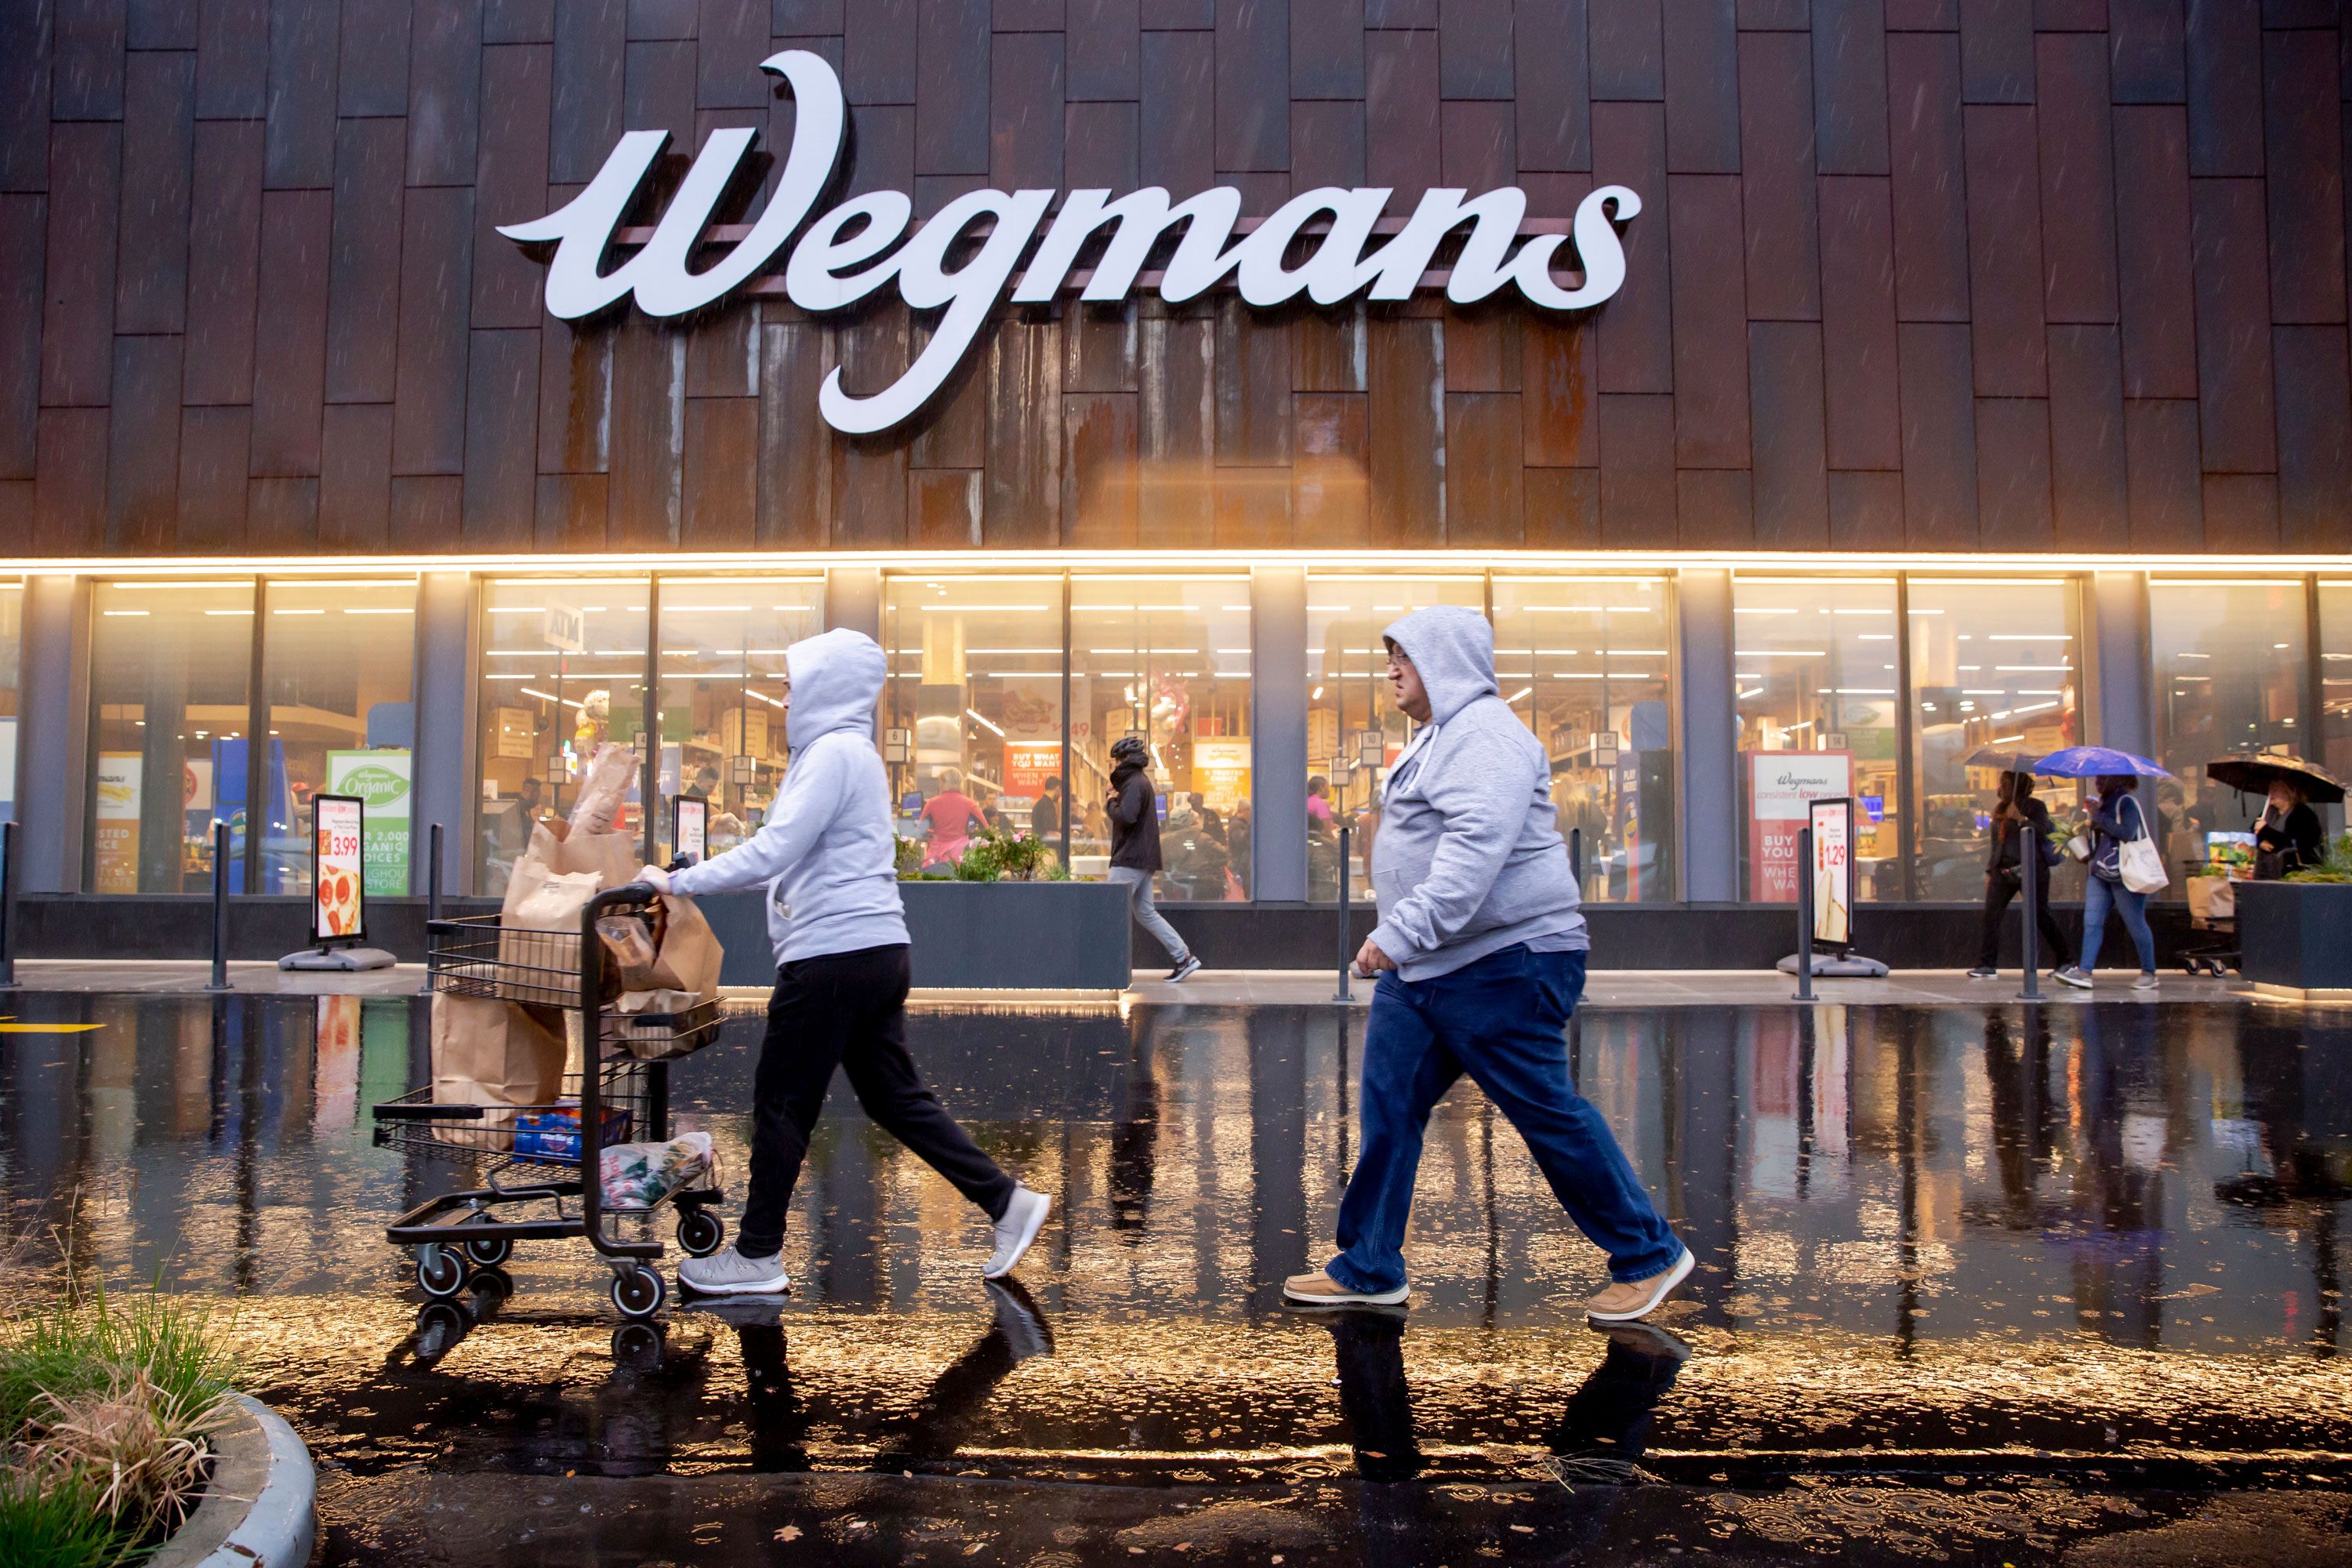 Wegmans 'delivers' on convenience with new strategy